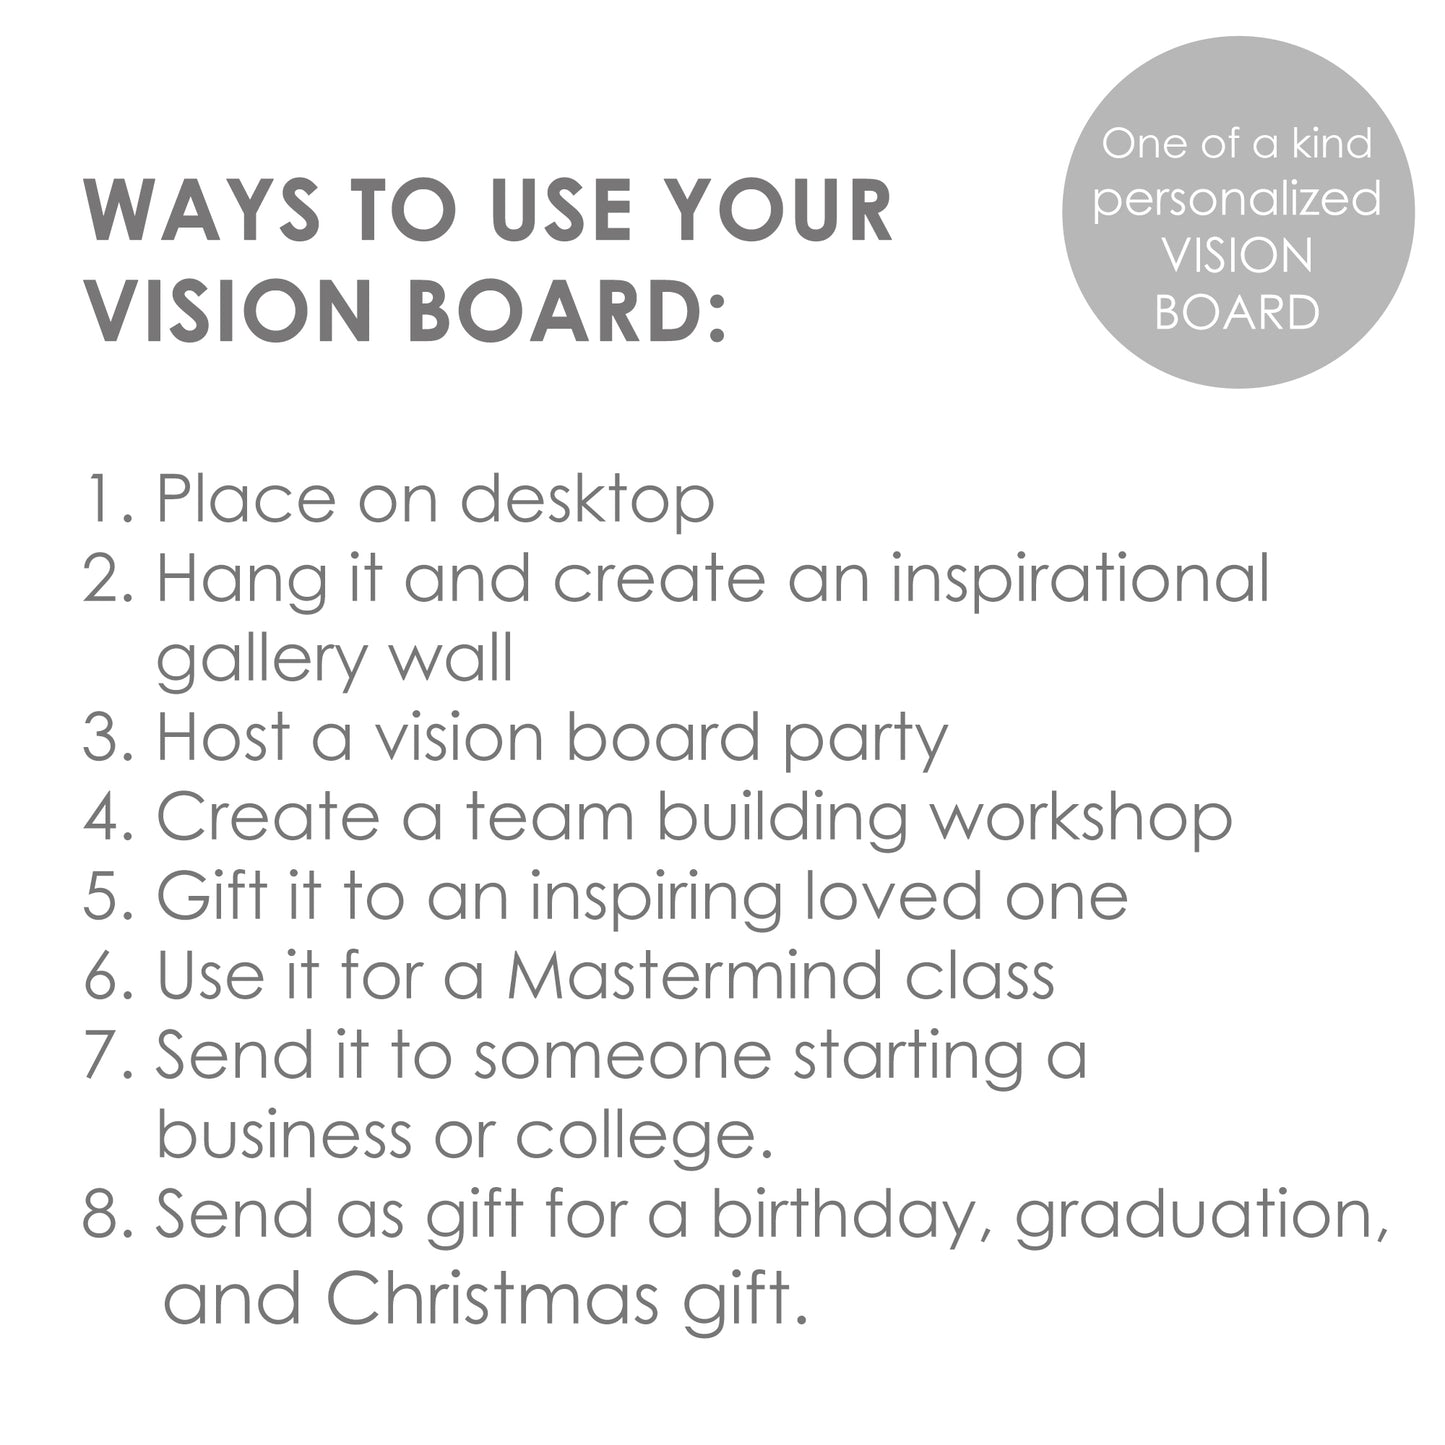 ideas for vision board party